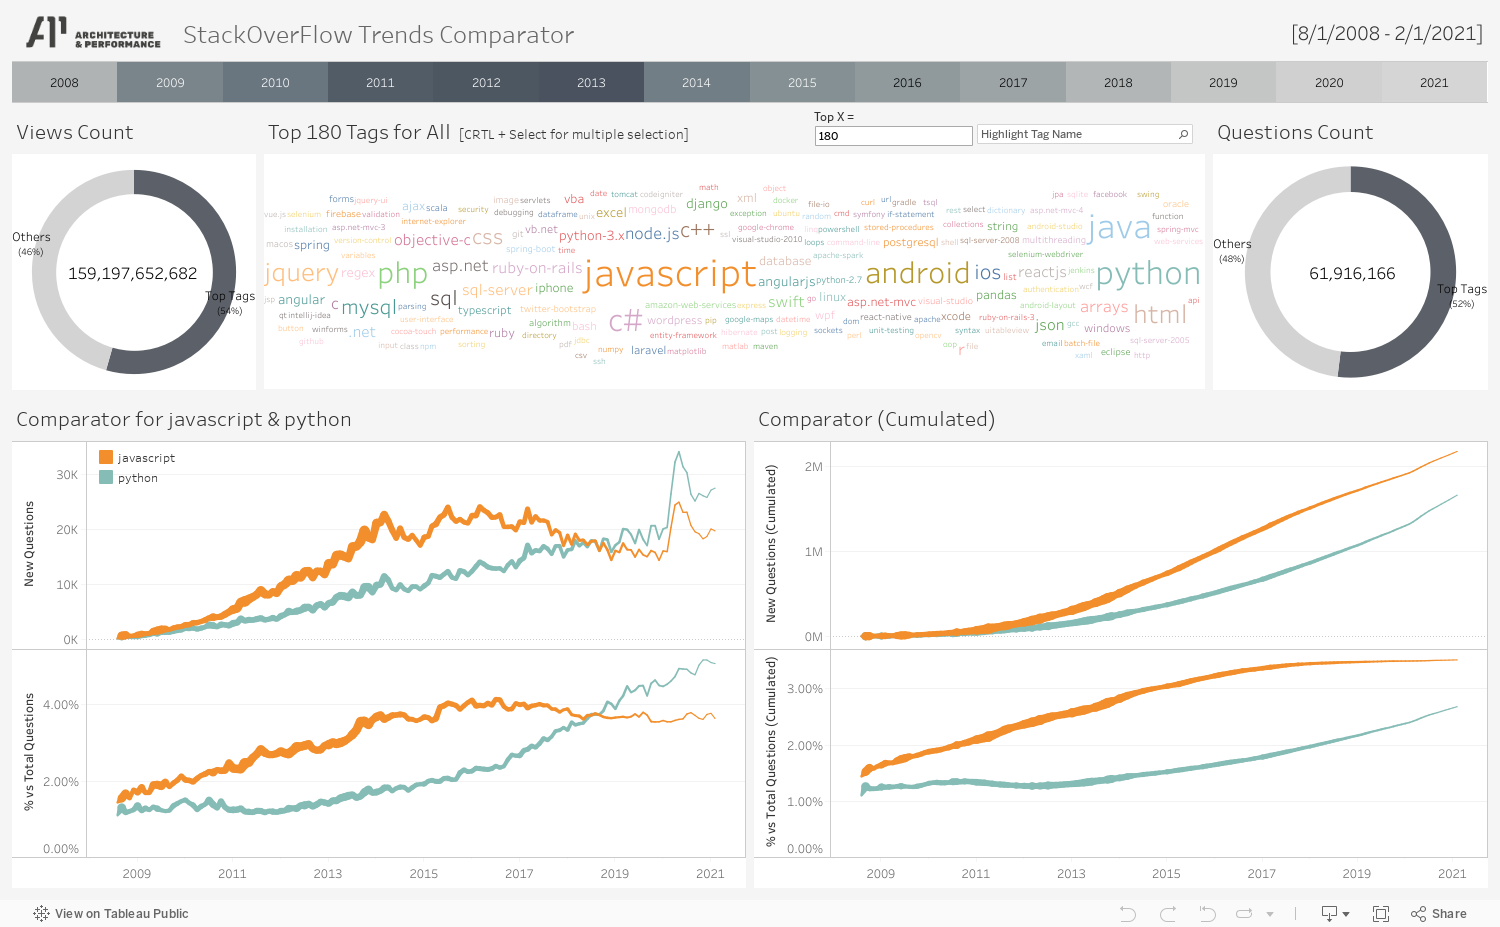 StackOverFlow Trends Comparator 